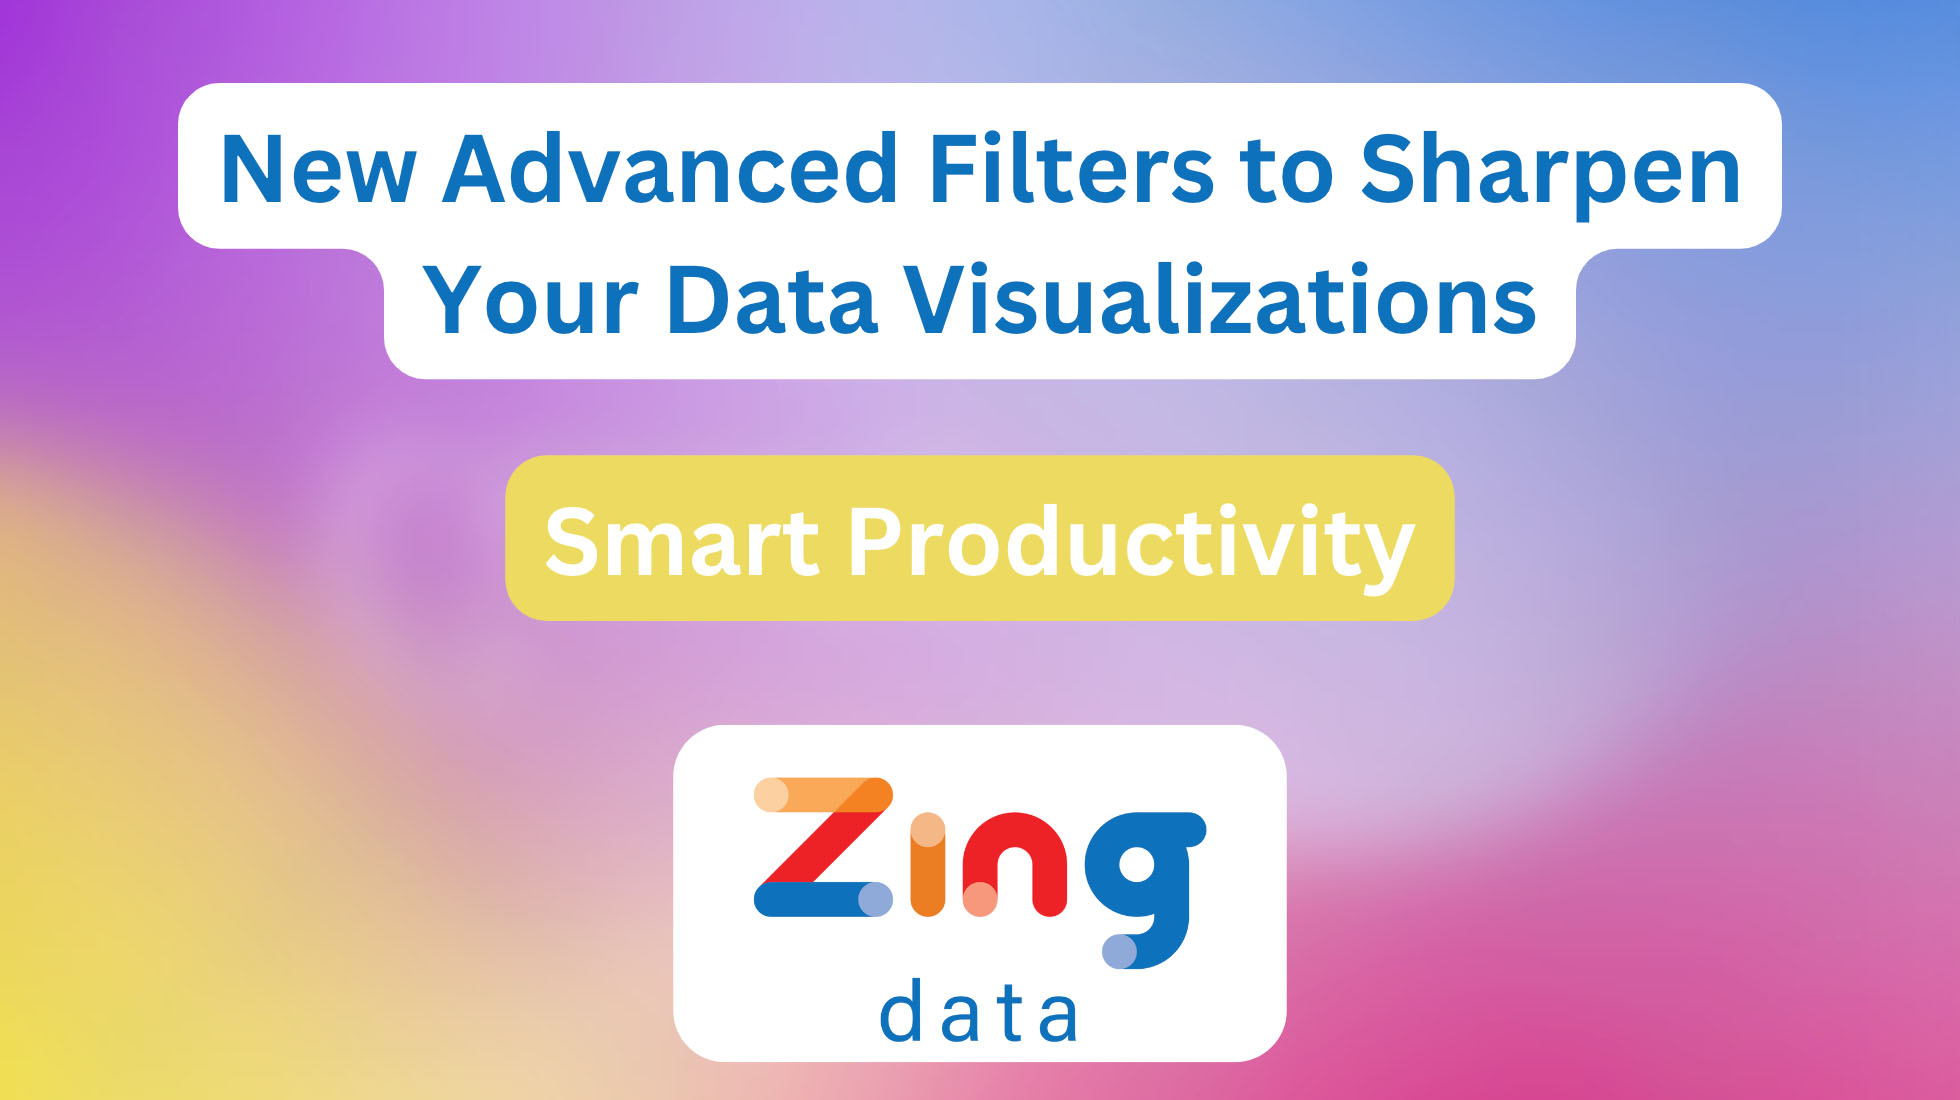 New Advanced Filters to Sharpen Your Data Visualizations